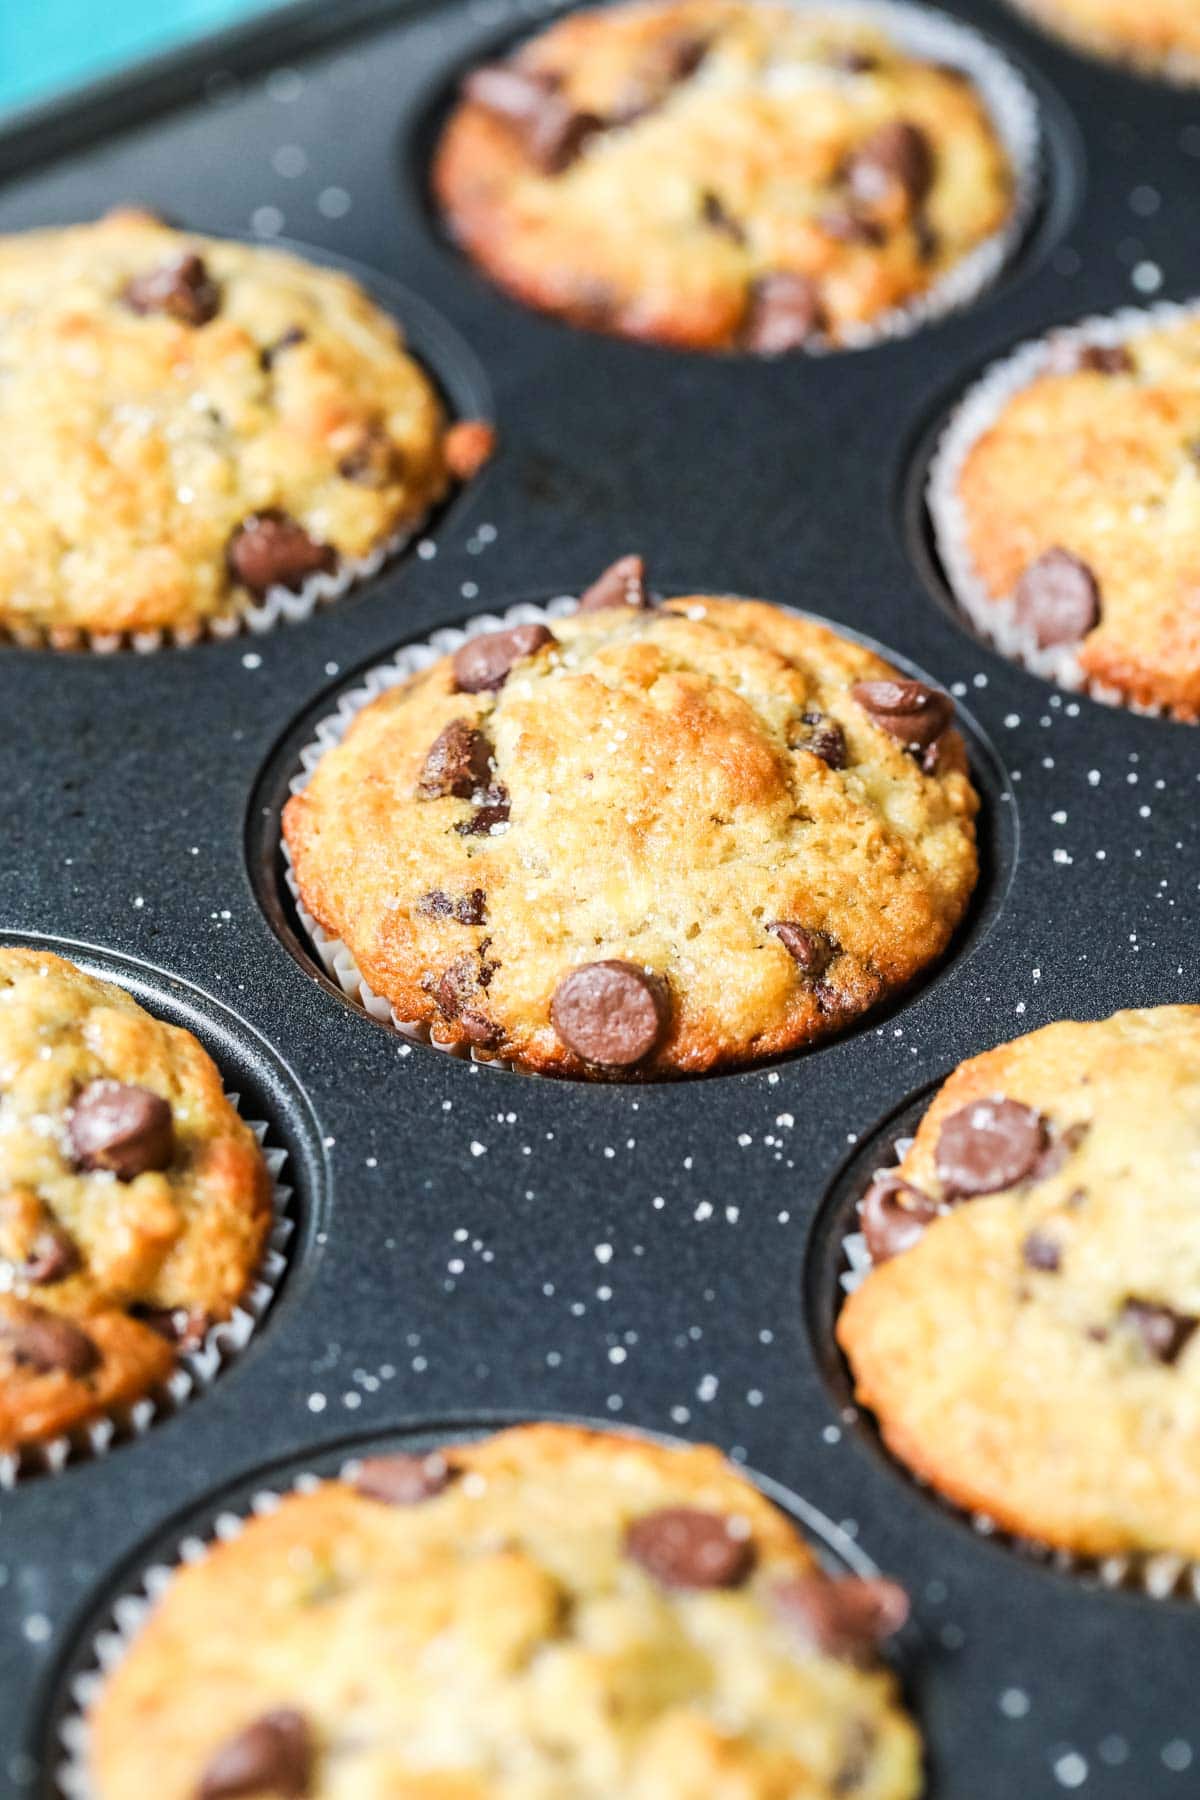 Muffin tray with golden brown, sugar dusted banana chocolate chip muffins inside.